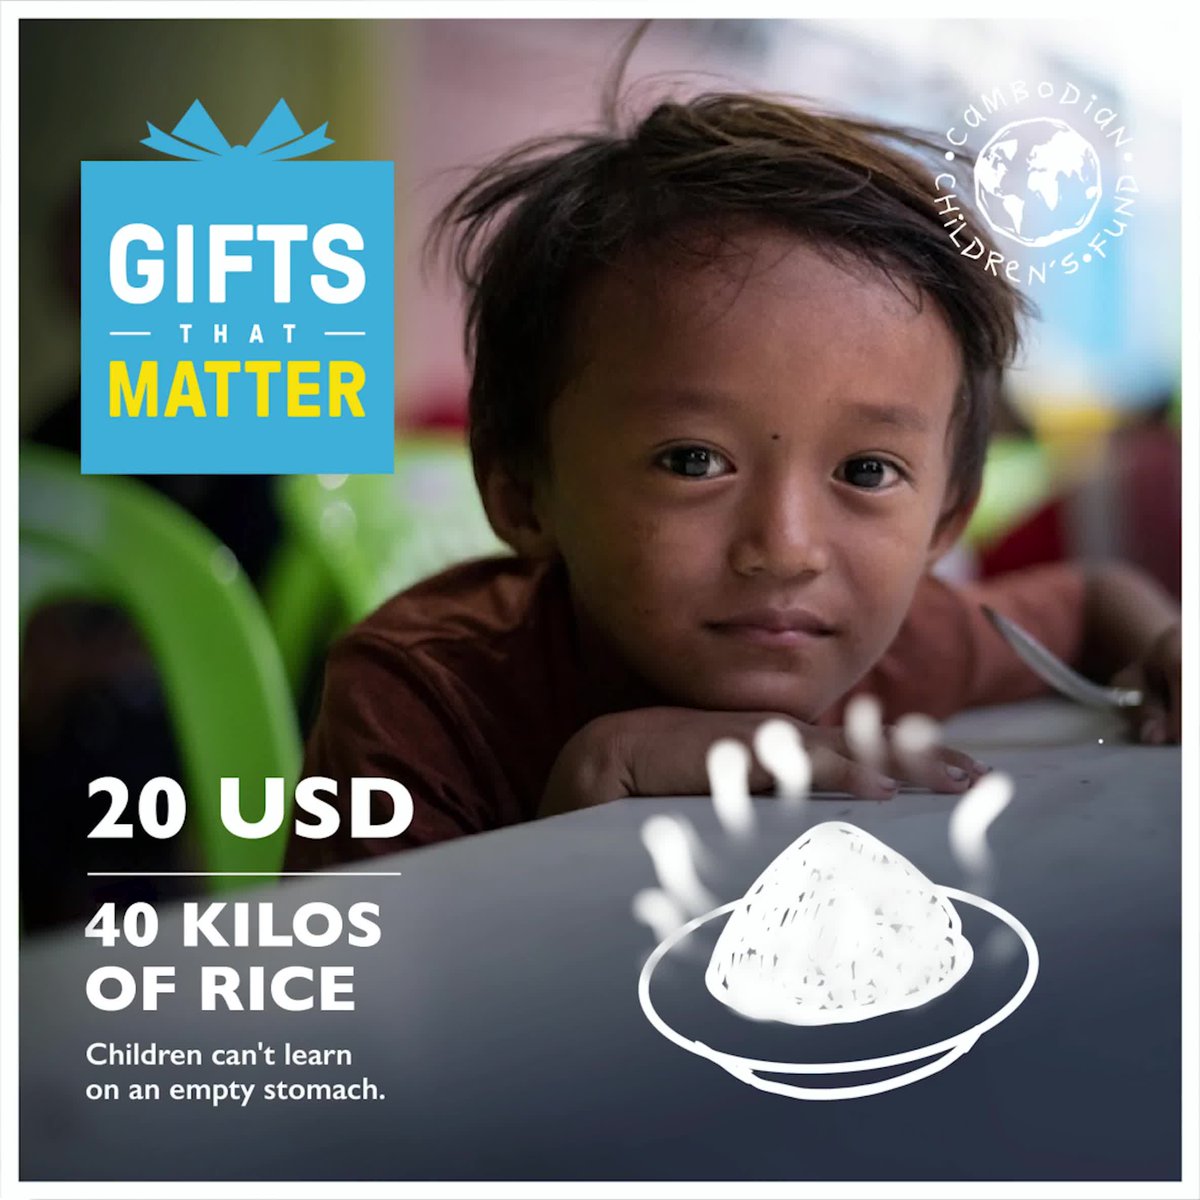 There's no time like the present to give a Gift That Matters. ccf-gifts-that-matter.raisely.com #GiftsThatMatter #MakeADifference #socialgood #giveback #Education #CCF #Donate